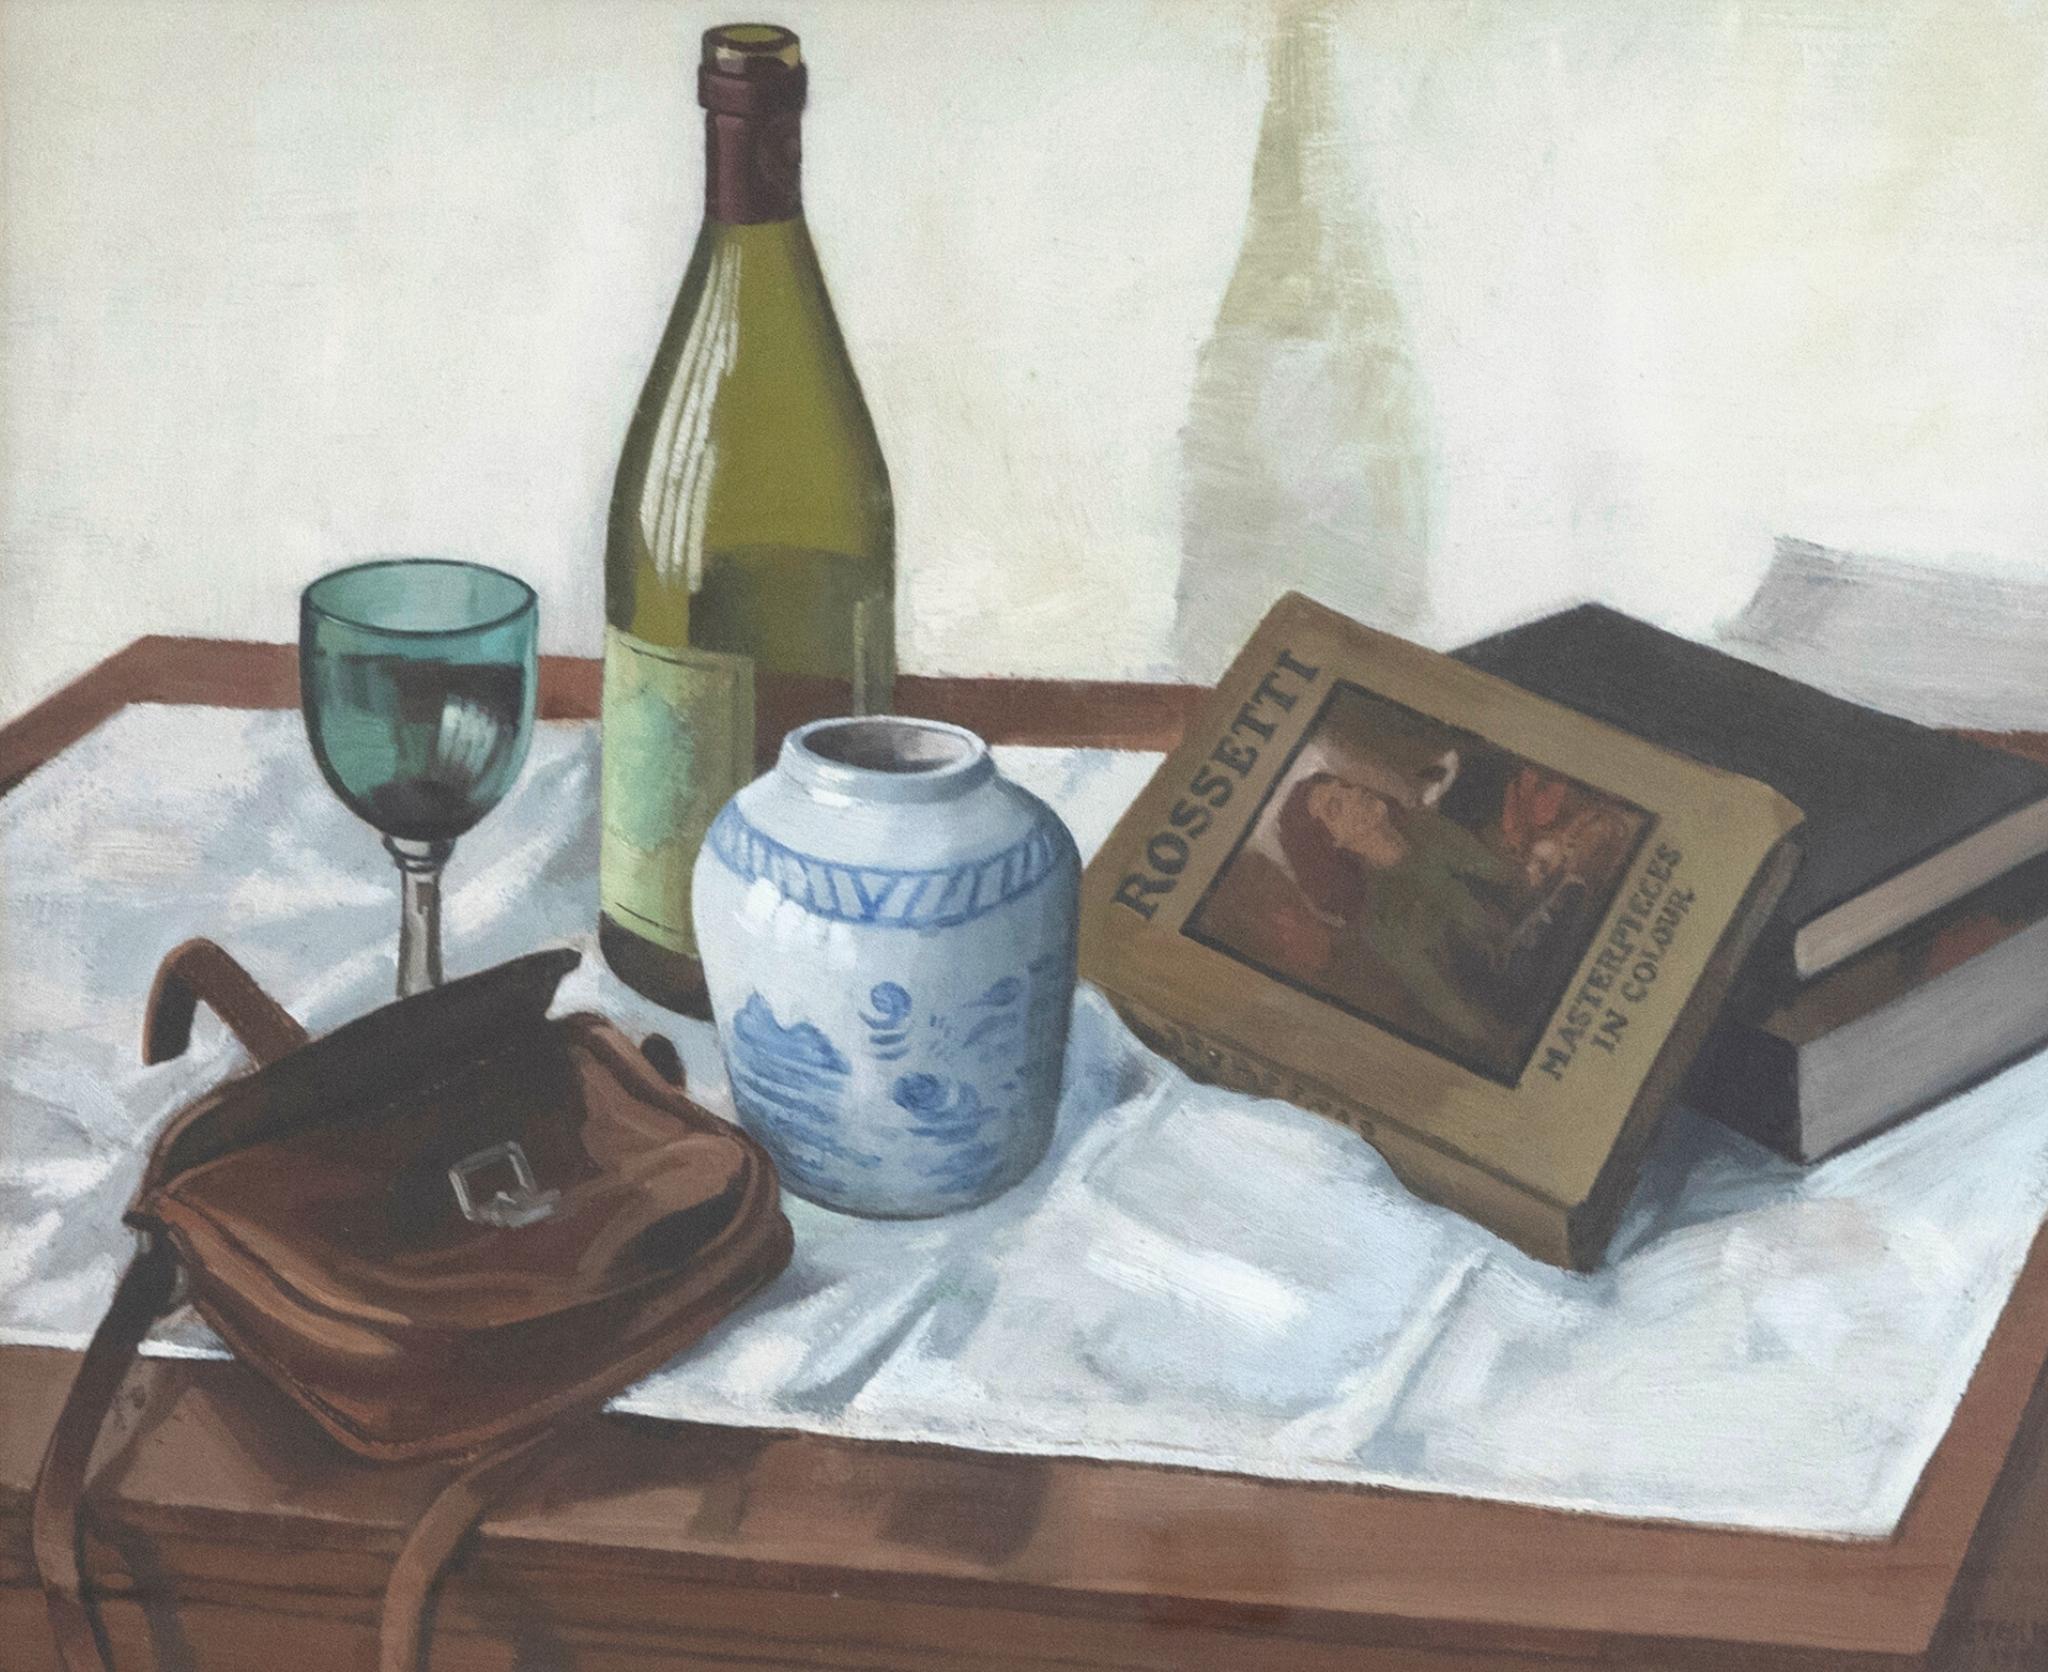 A charming still life study depicting a side table with a vase, a placed satchel, a bottle of whine and an art book on Rosetti. The artist captures this delightful selection of objects using dry brushwork, creating texture within the scene. Signed